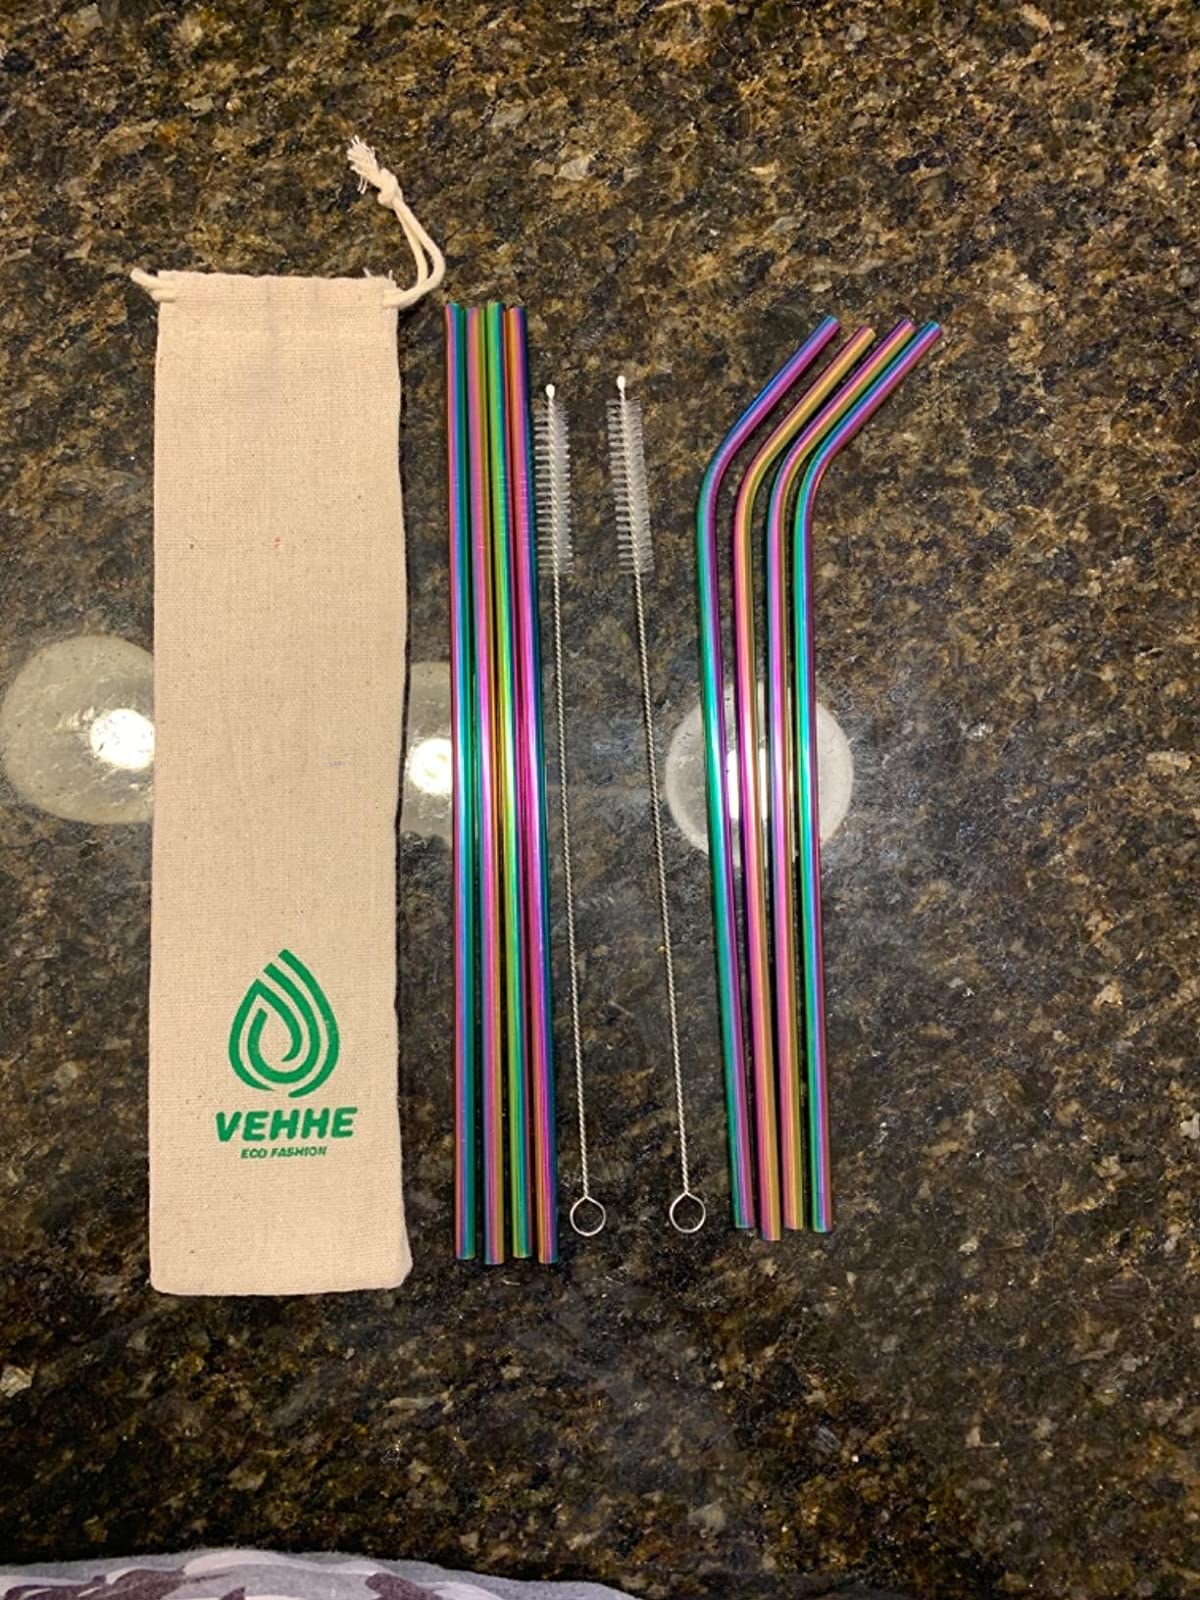 Reviewer immage of the vehhe reusable straws and straw cleaners